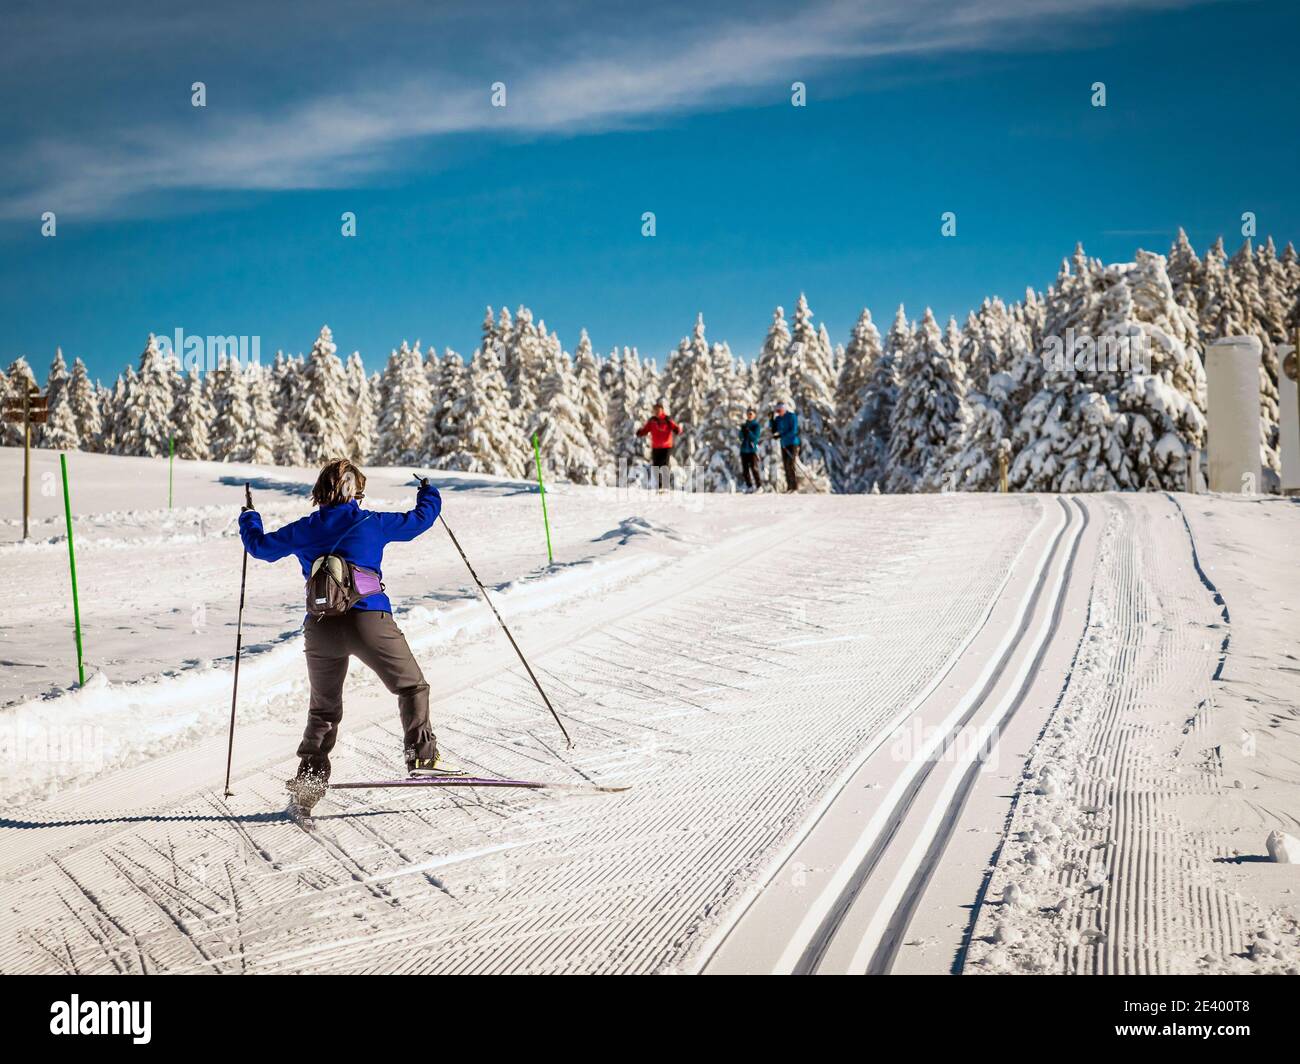 Nordic skiing in the Vanoise Massif, Tarentaise Valley, Bozel Valley, near the ski areas of the 3 Valleys, Paradiski and Pralognan Vanoise. Nordic ski Stock Photo